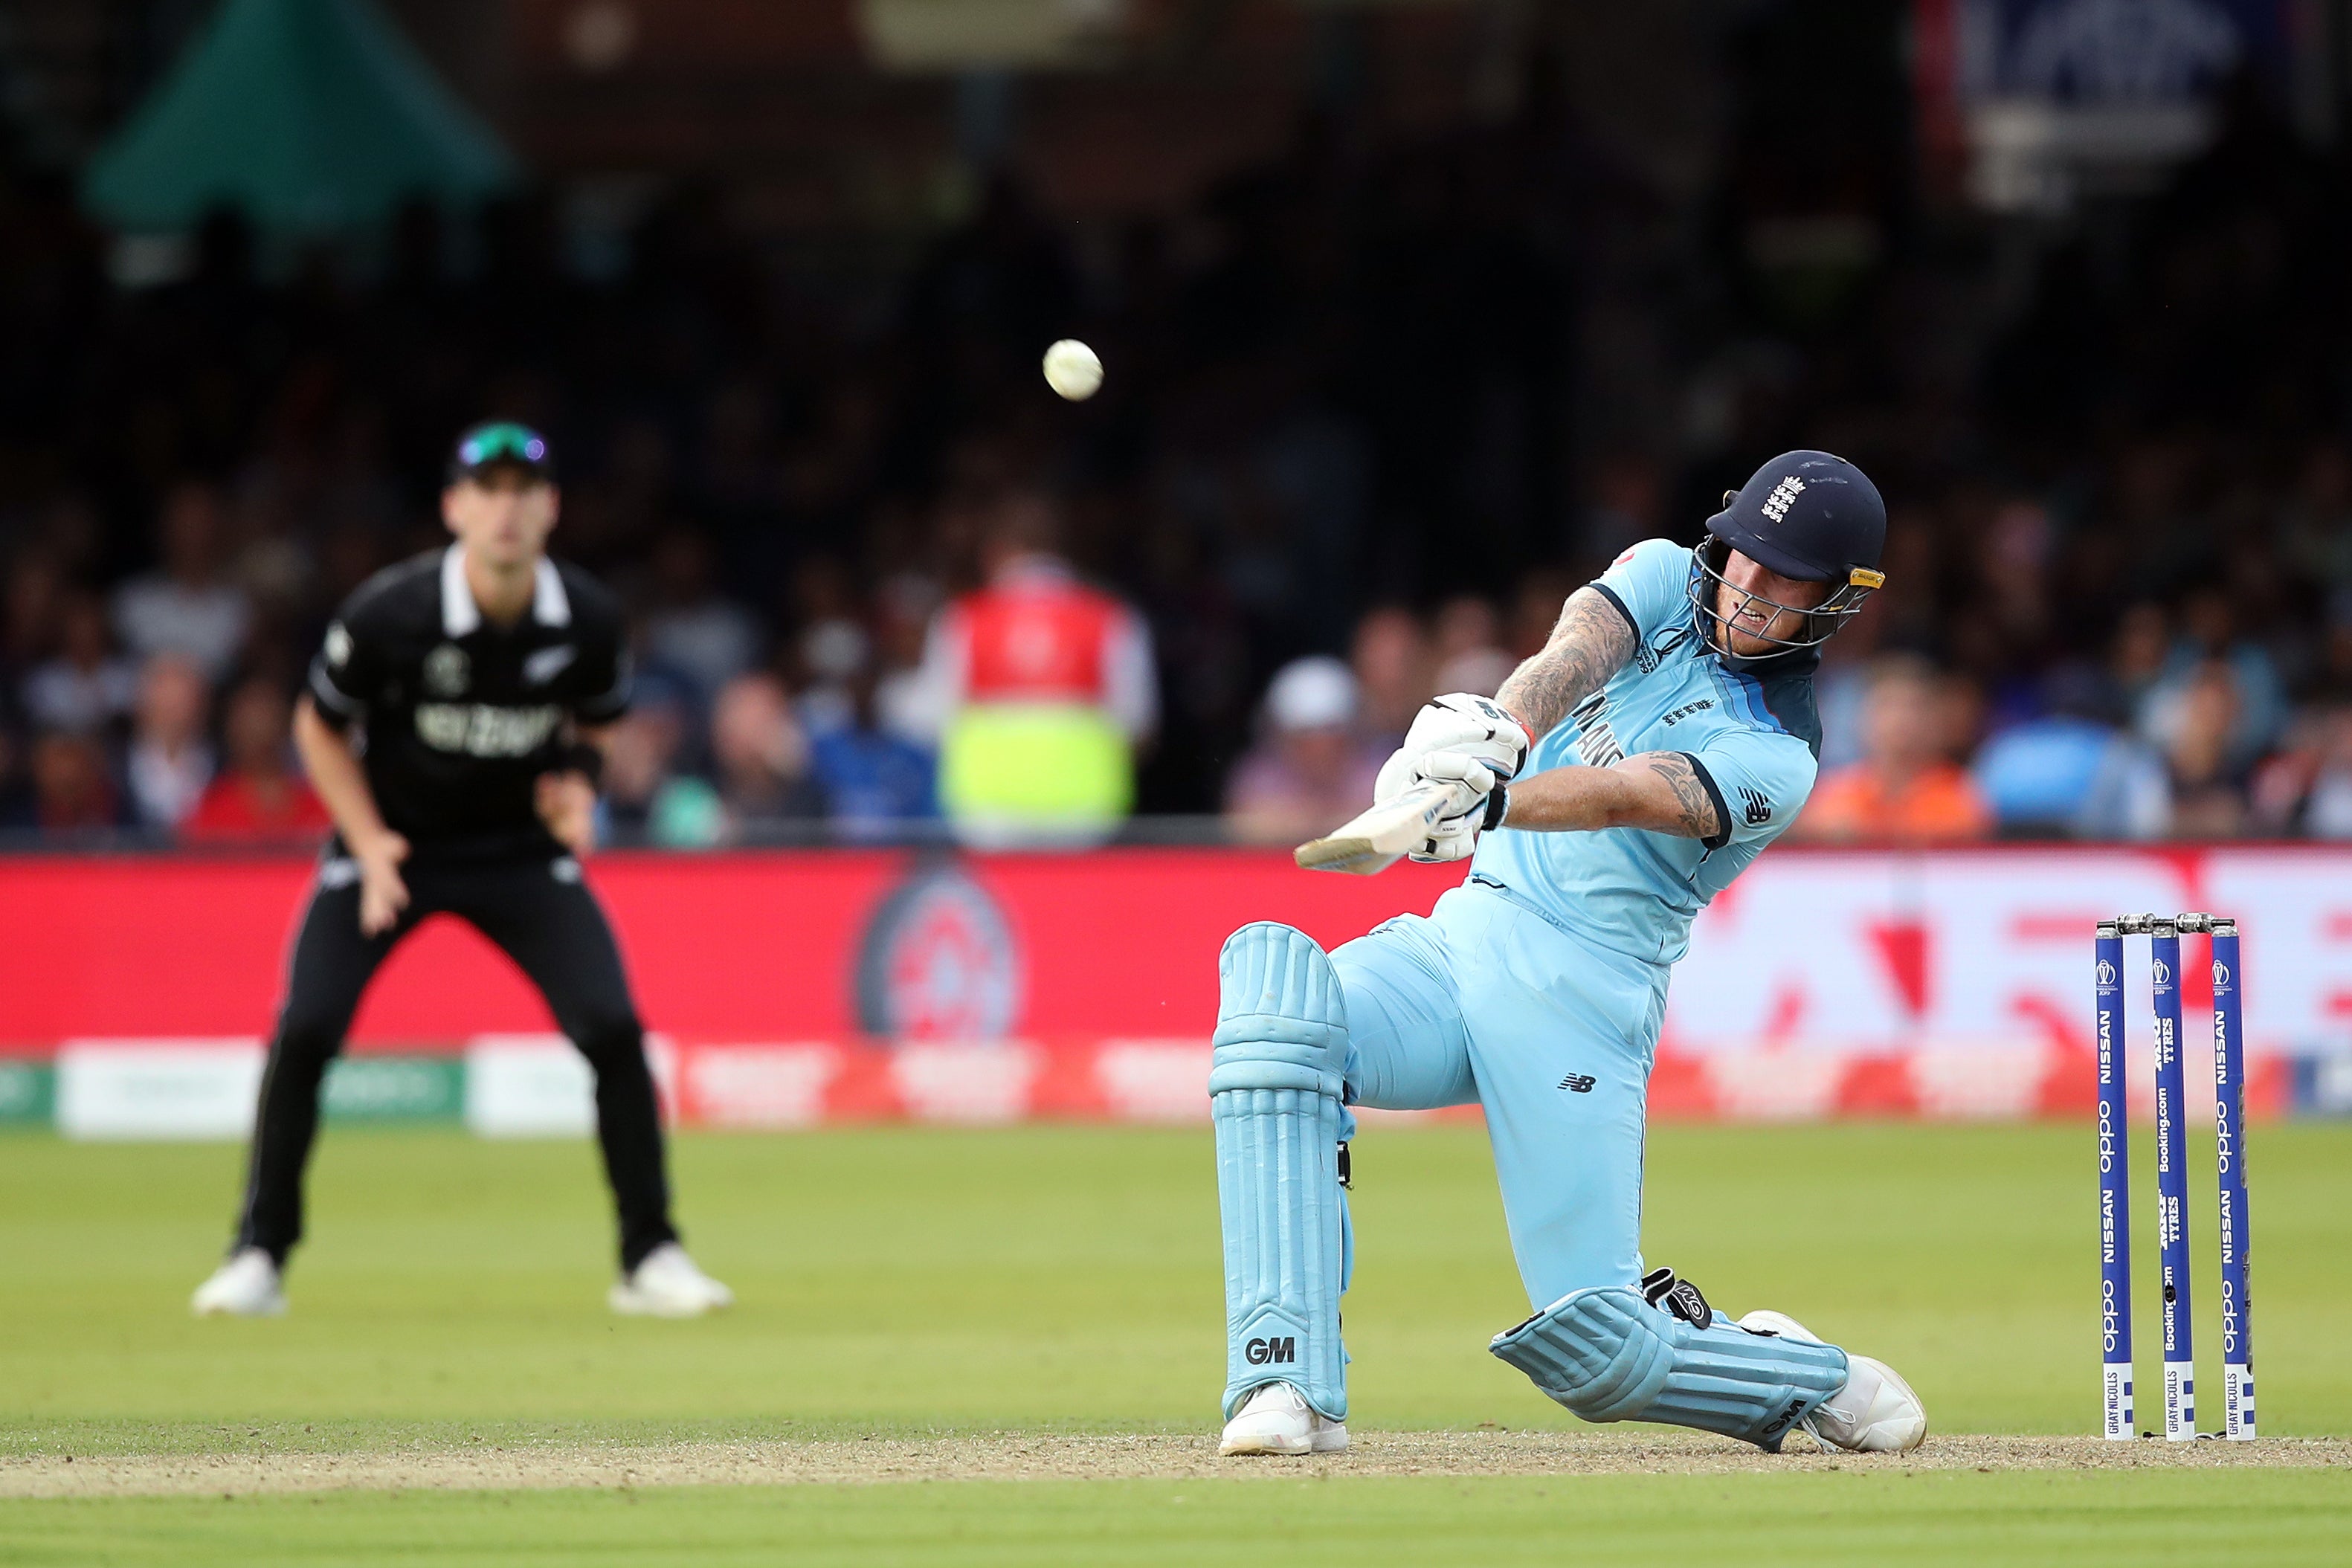 Ben Stokes played the innings of his life in the 2019 World Cup final at Lord’s (Nick Potts/PA)